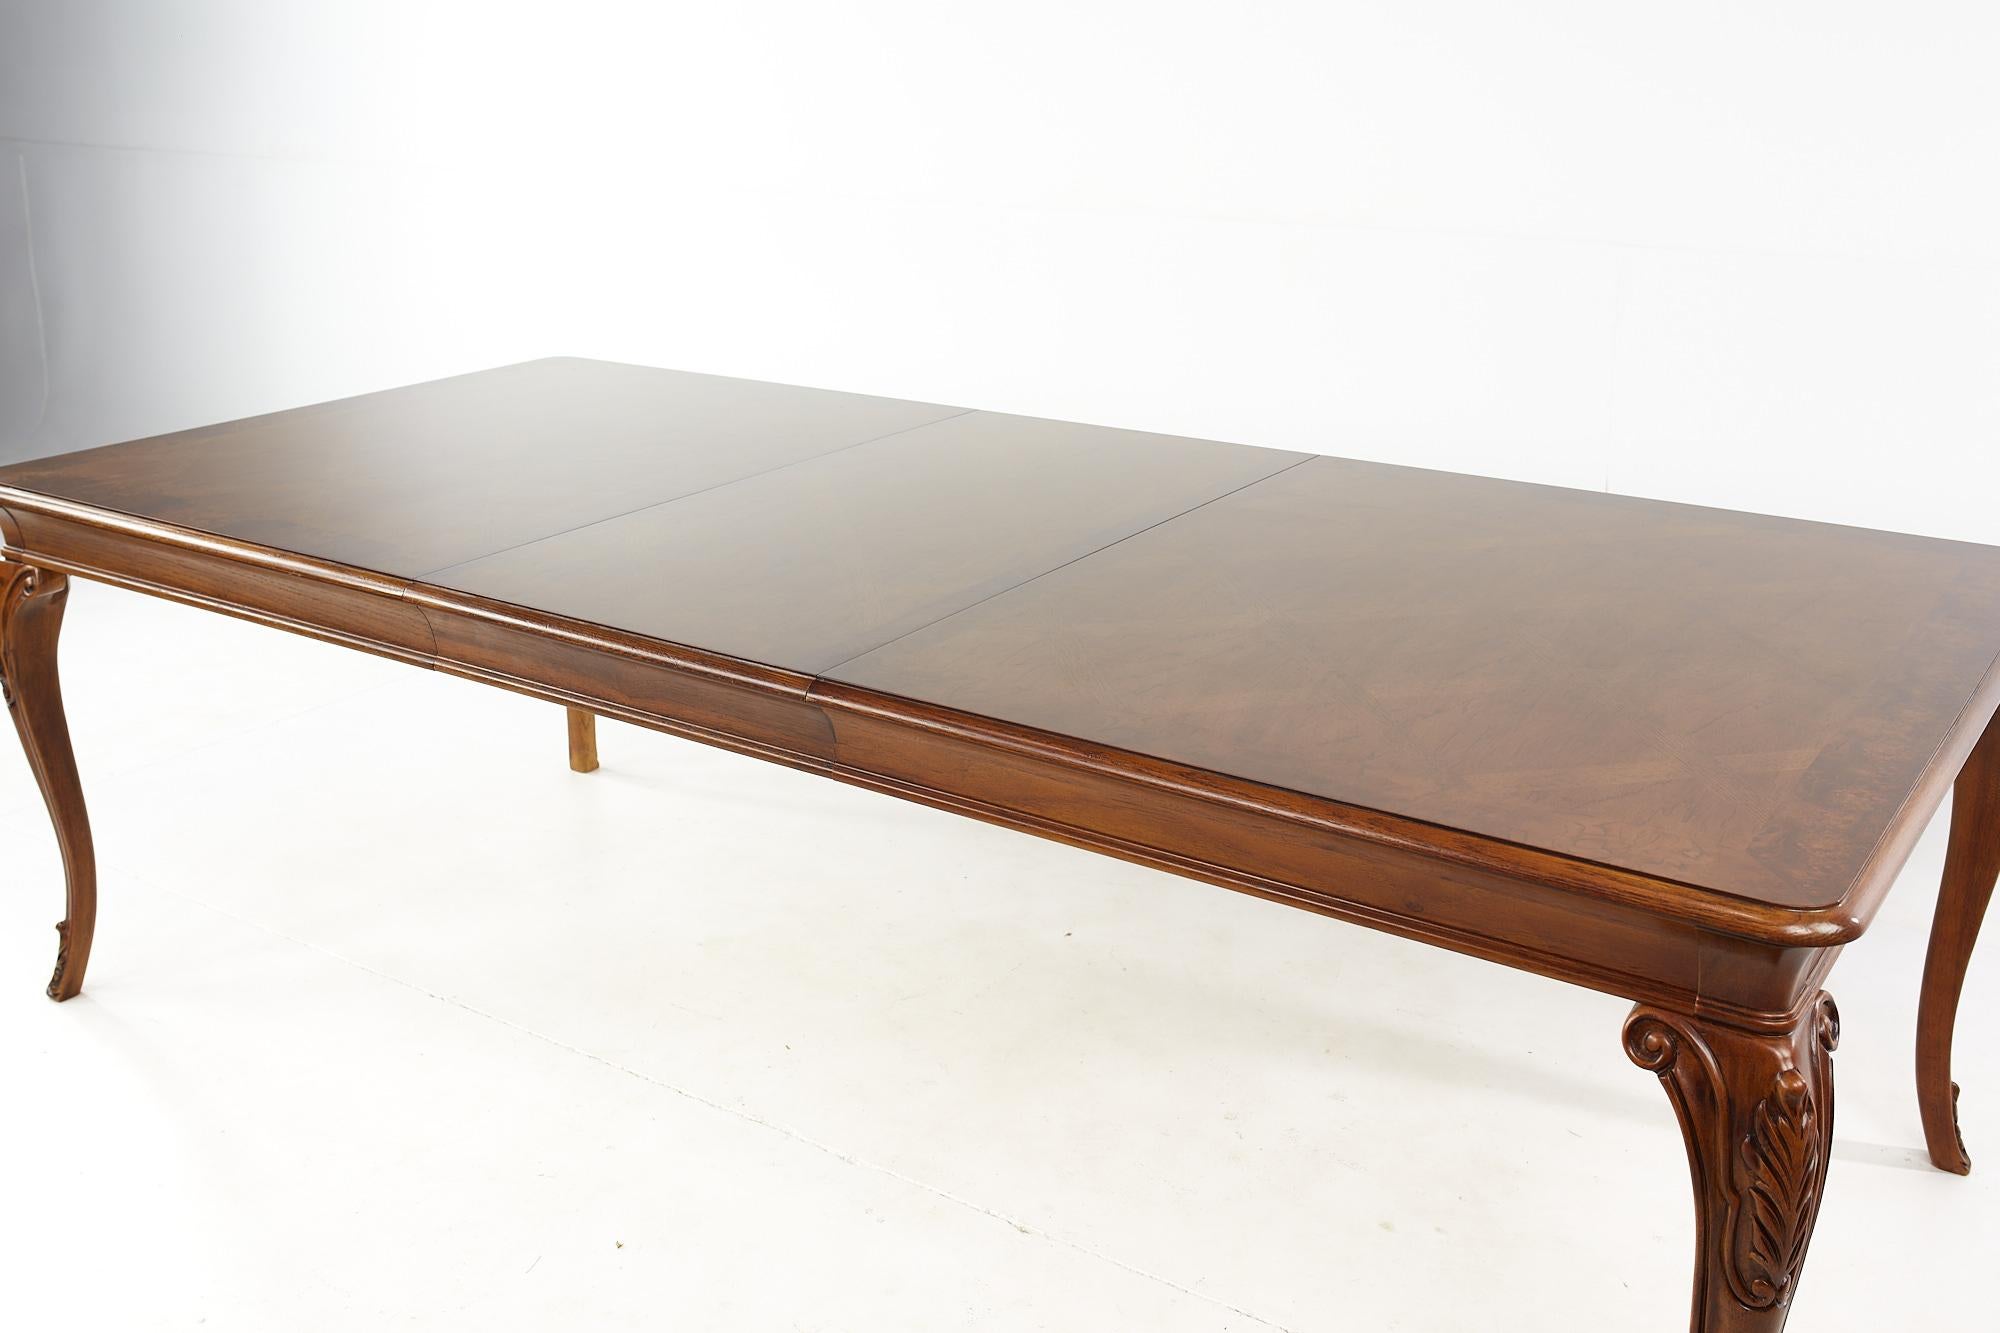 Thomasville Walnut and Burlwood Expanding Dining Table with 2 Leaves 3